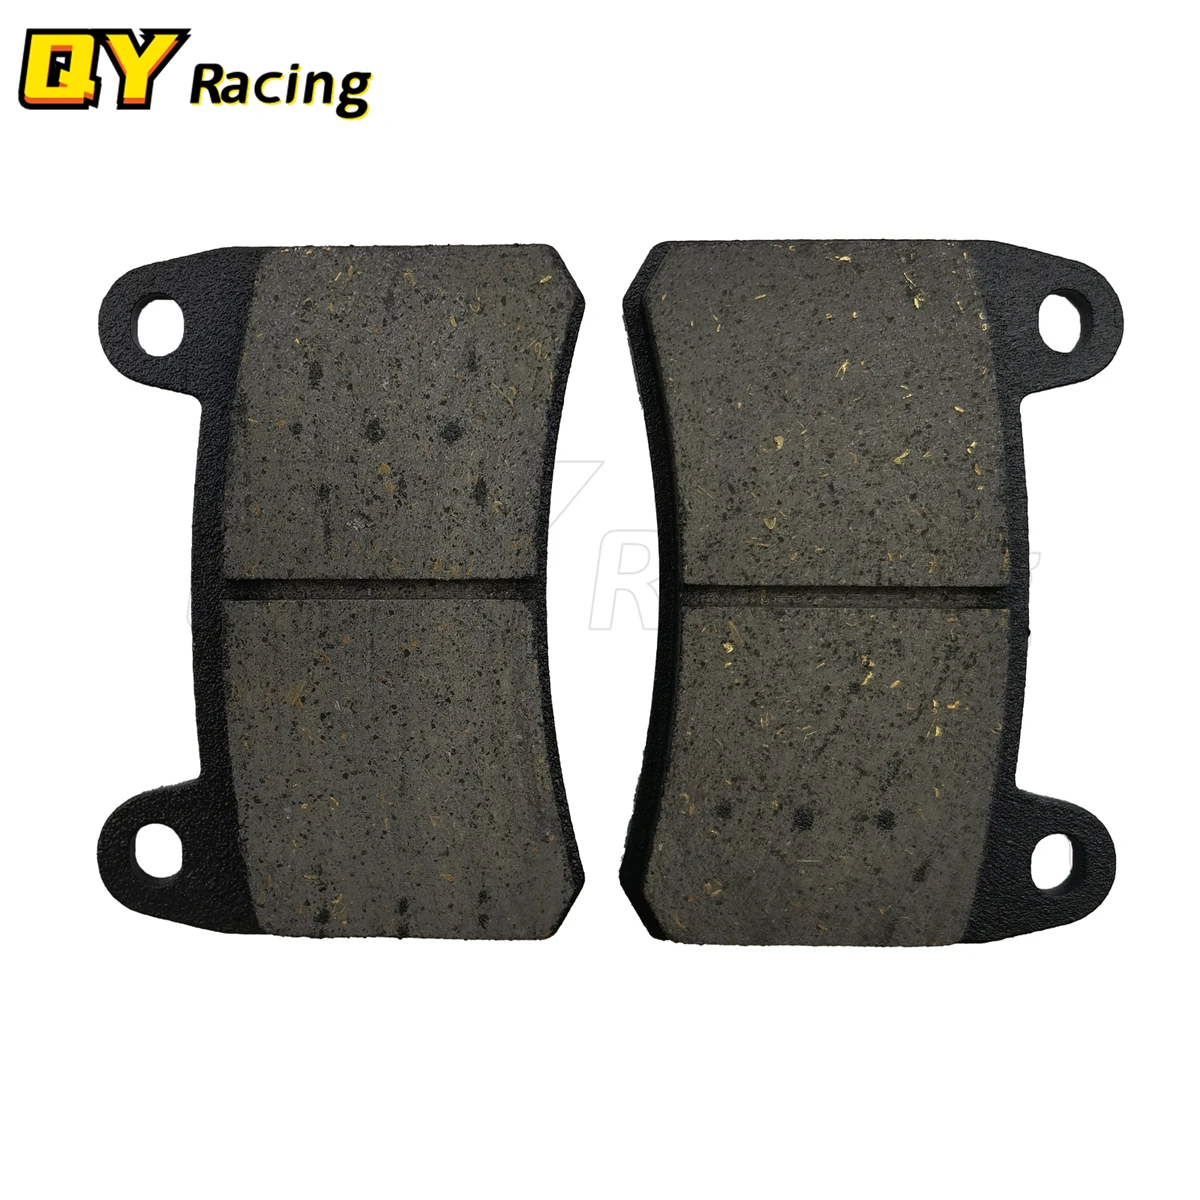 Motorcycle Front and Rear ke Pads  Benelli BJ300GS BJ300 BN300 TNT300 TNT 300 BN - £110.10 GBP